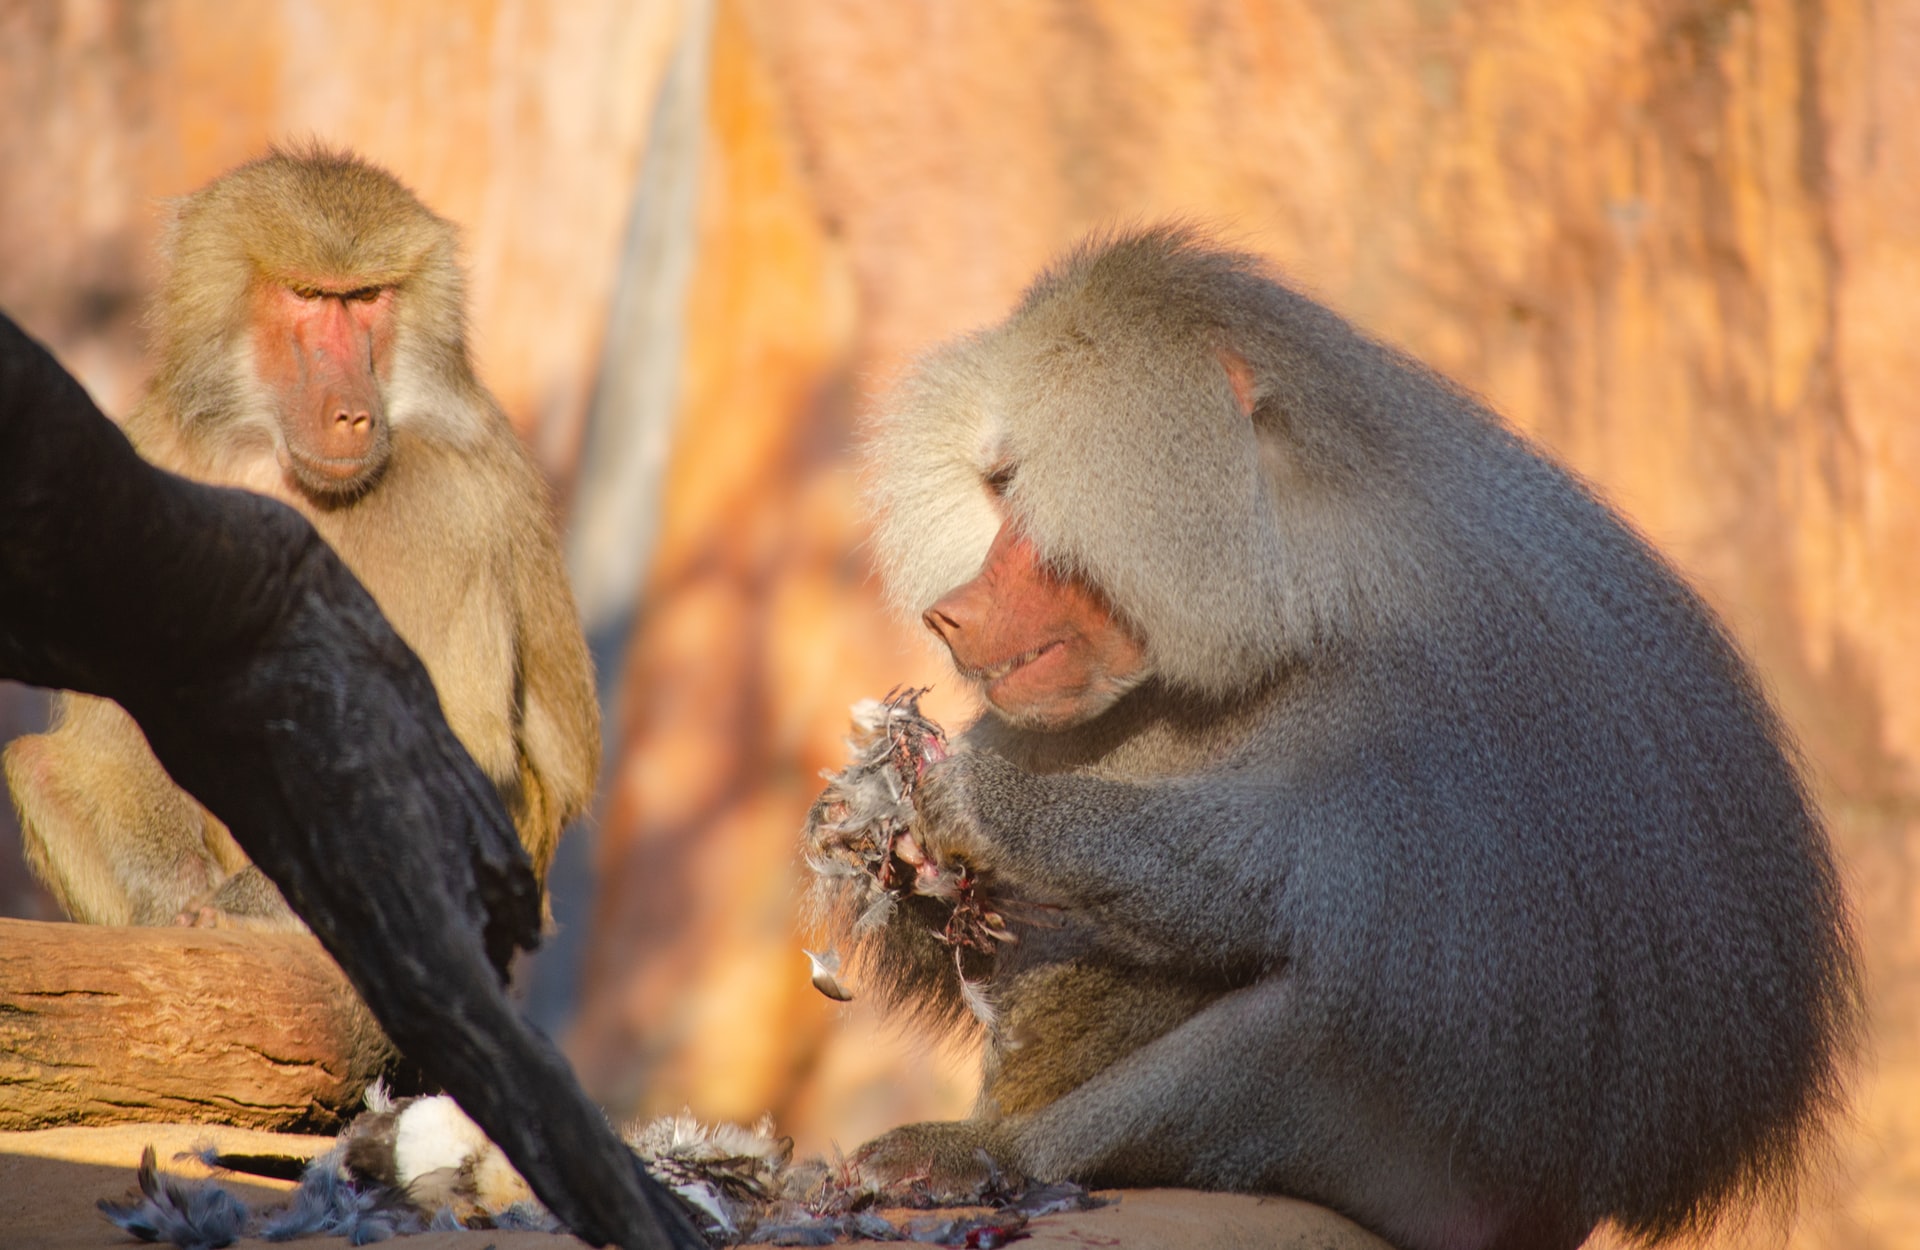 What is the difference between a baboon and shrimp?